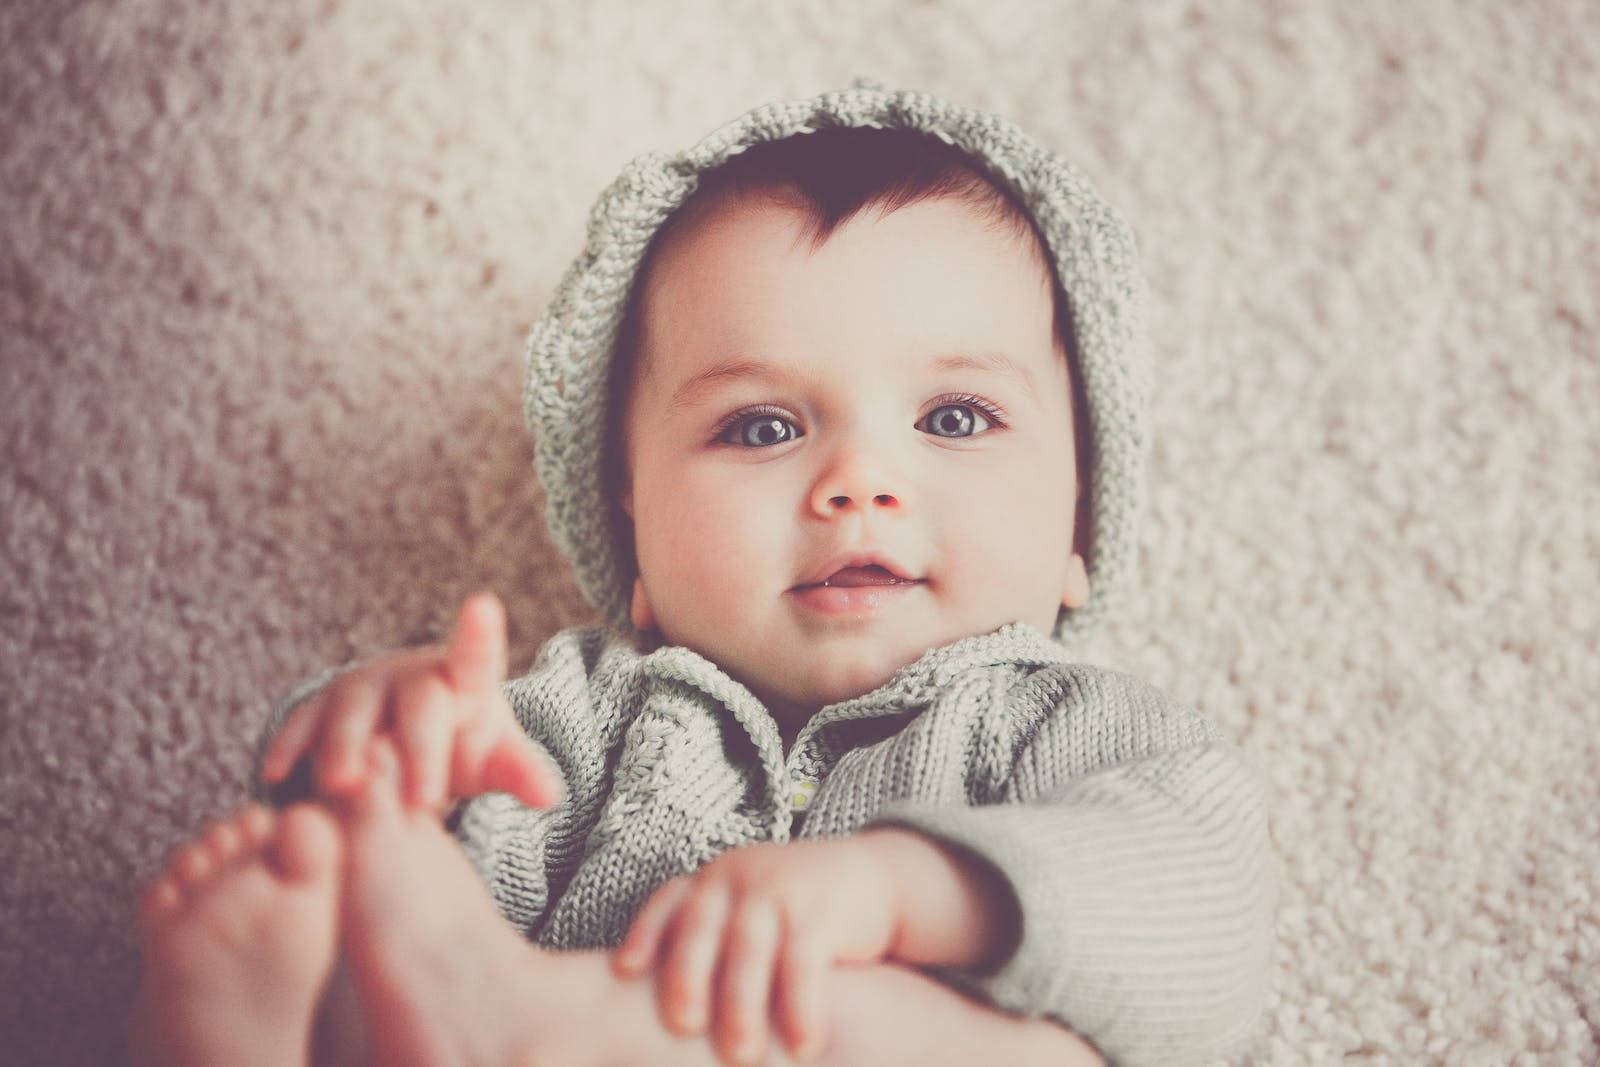 Baby Boy Wearing Gray Knitted Outfit